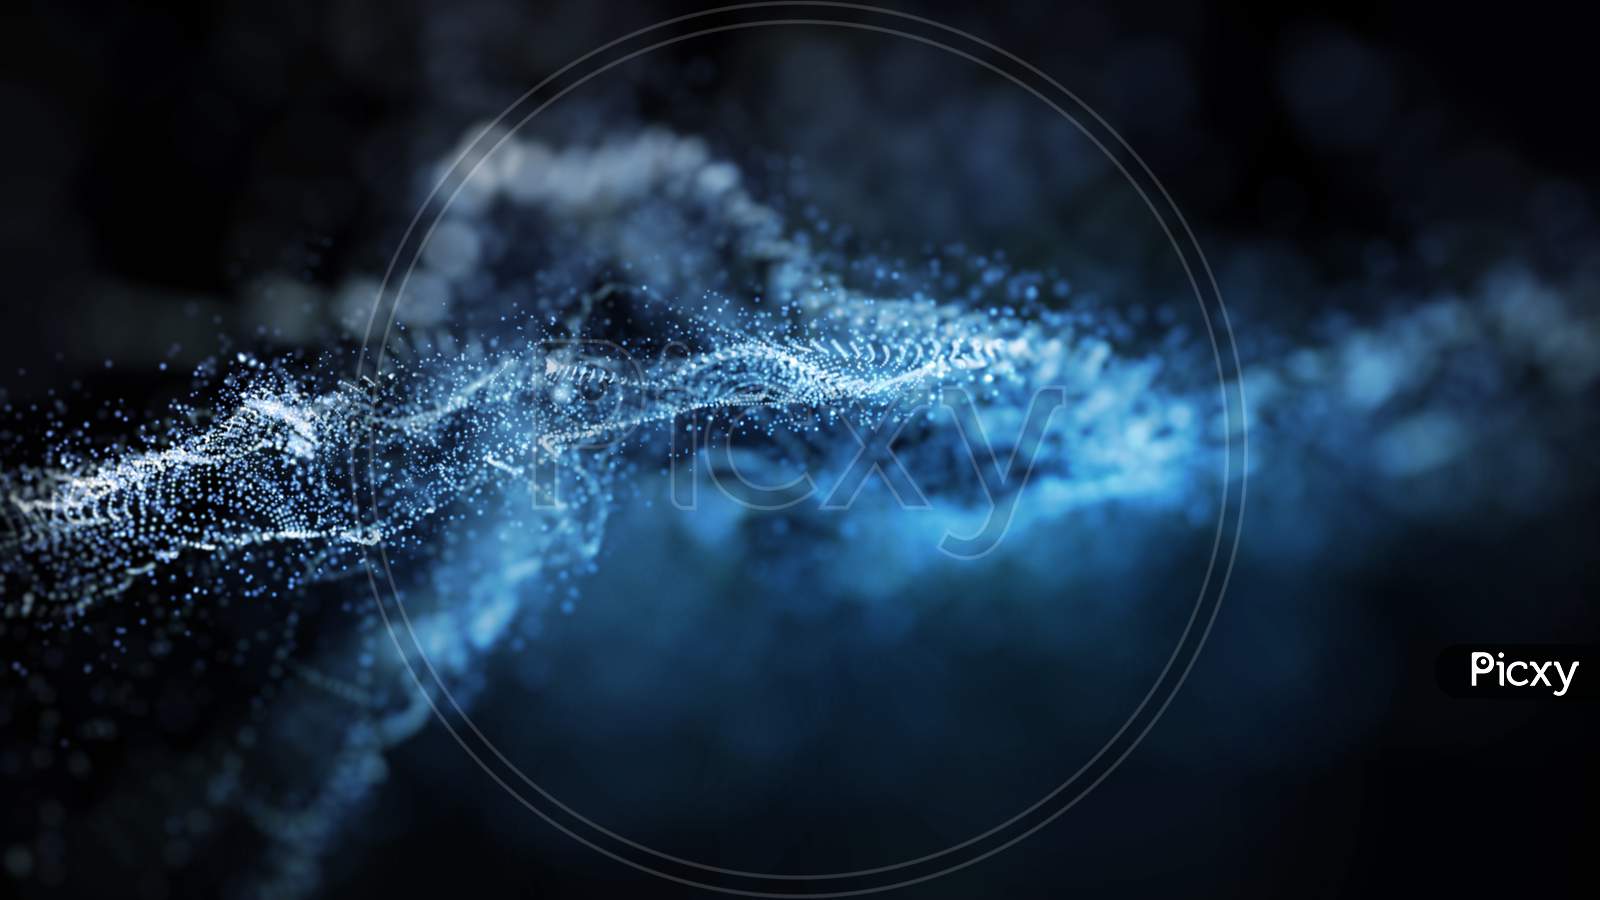 Abstract Blue Color Digital Particles Wave Form Network With Dust And Light Motion Background. Modern Technology And Futuristics Science Concept. 3D Illustration Rendering